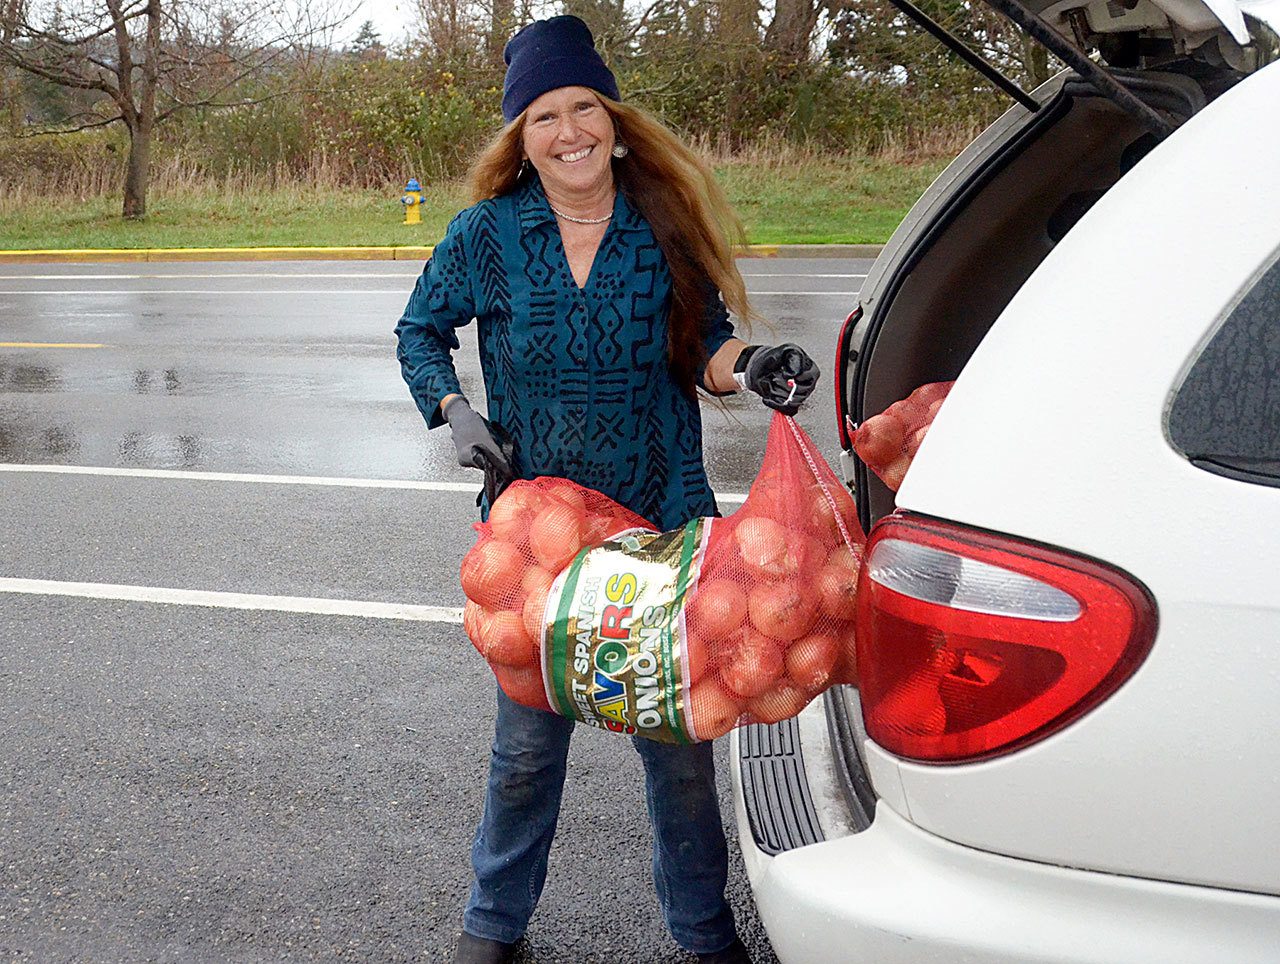 Shirley Moss, manager of the Jefferson County Food Bank, unloads a donation of onions Tuesday in preparation for the busy Thanksgiving holiday. (Cydney McFarland/Peninsula Daily News)